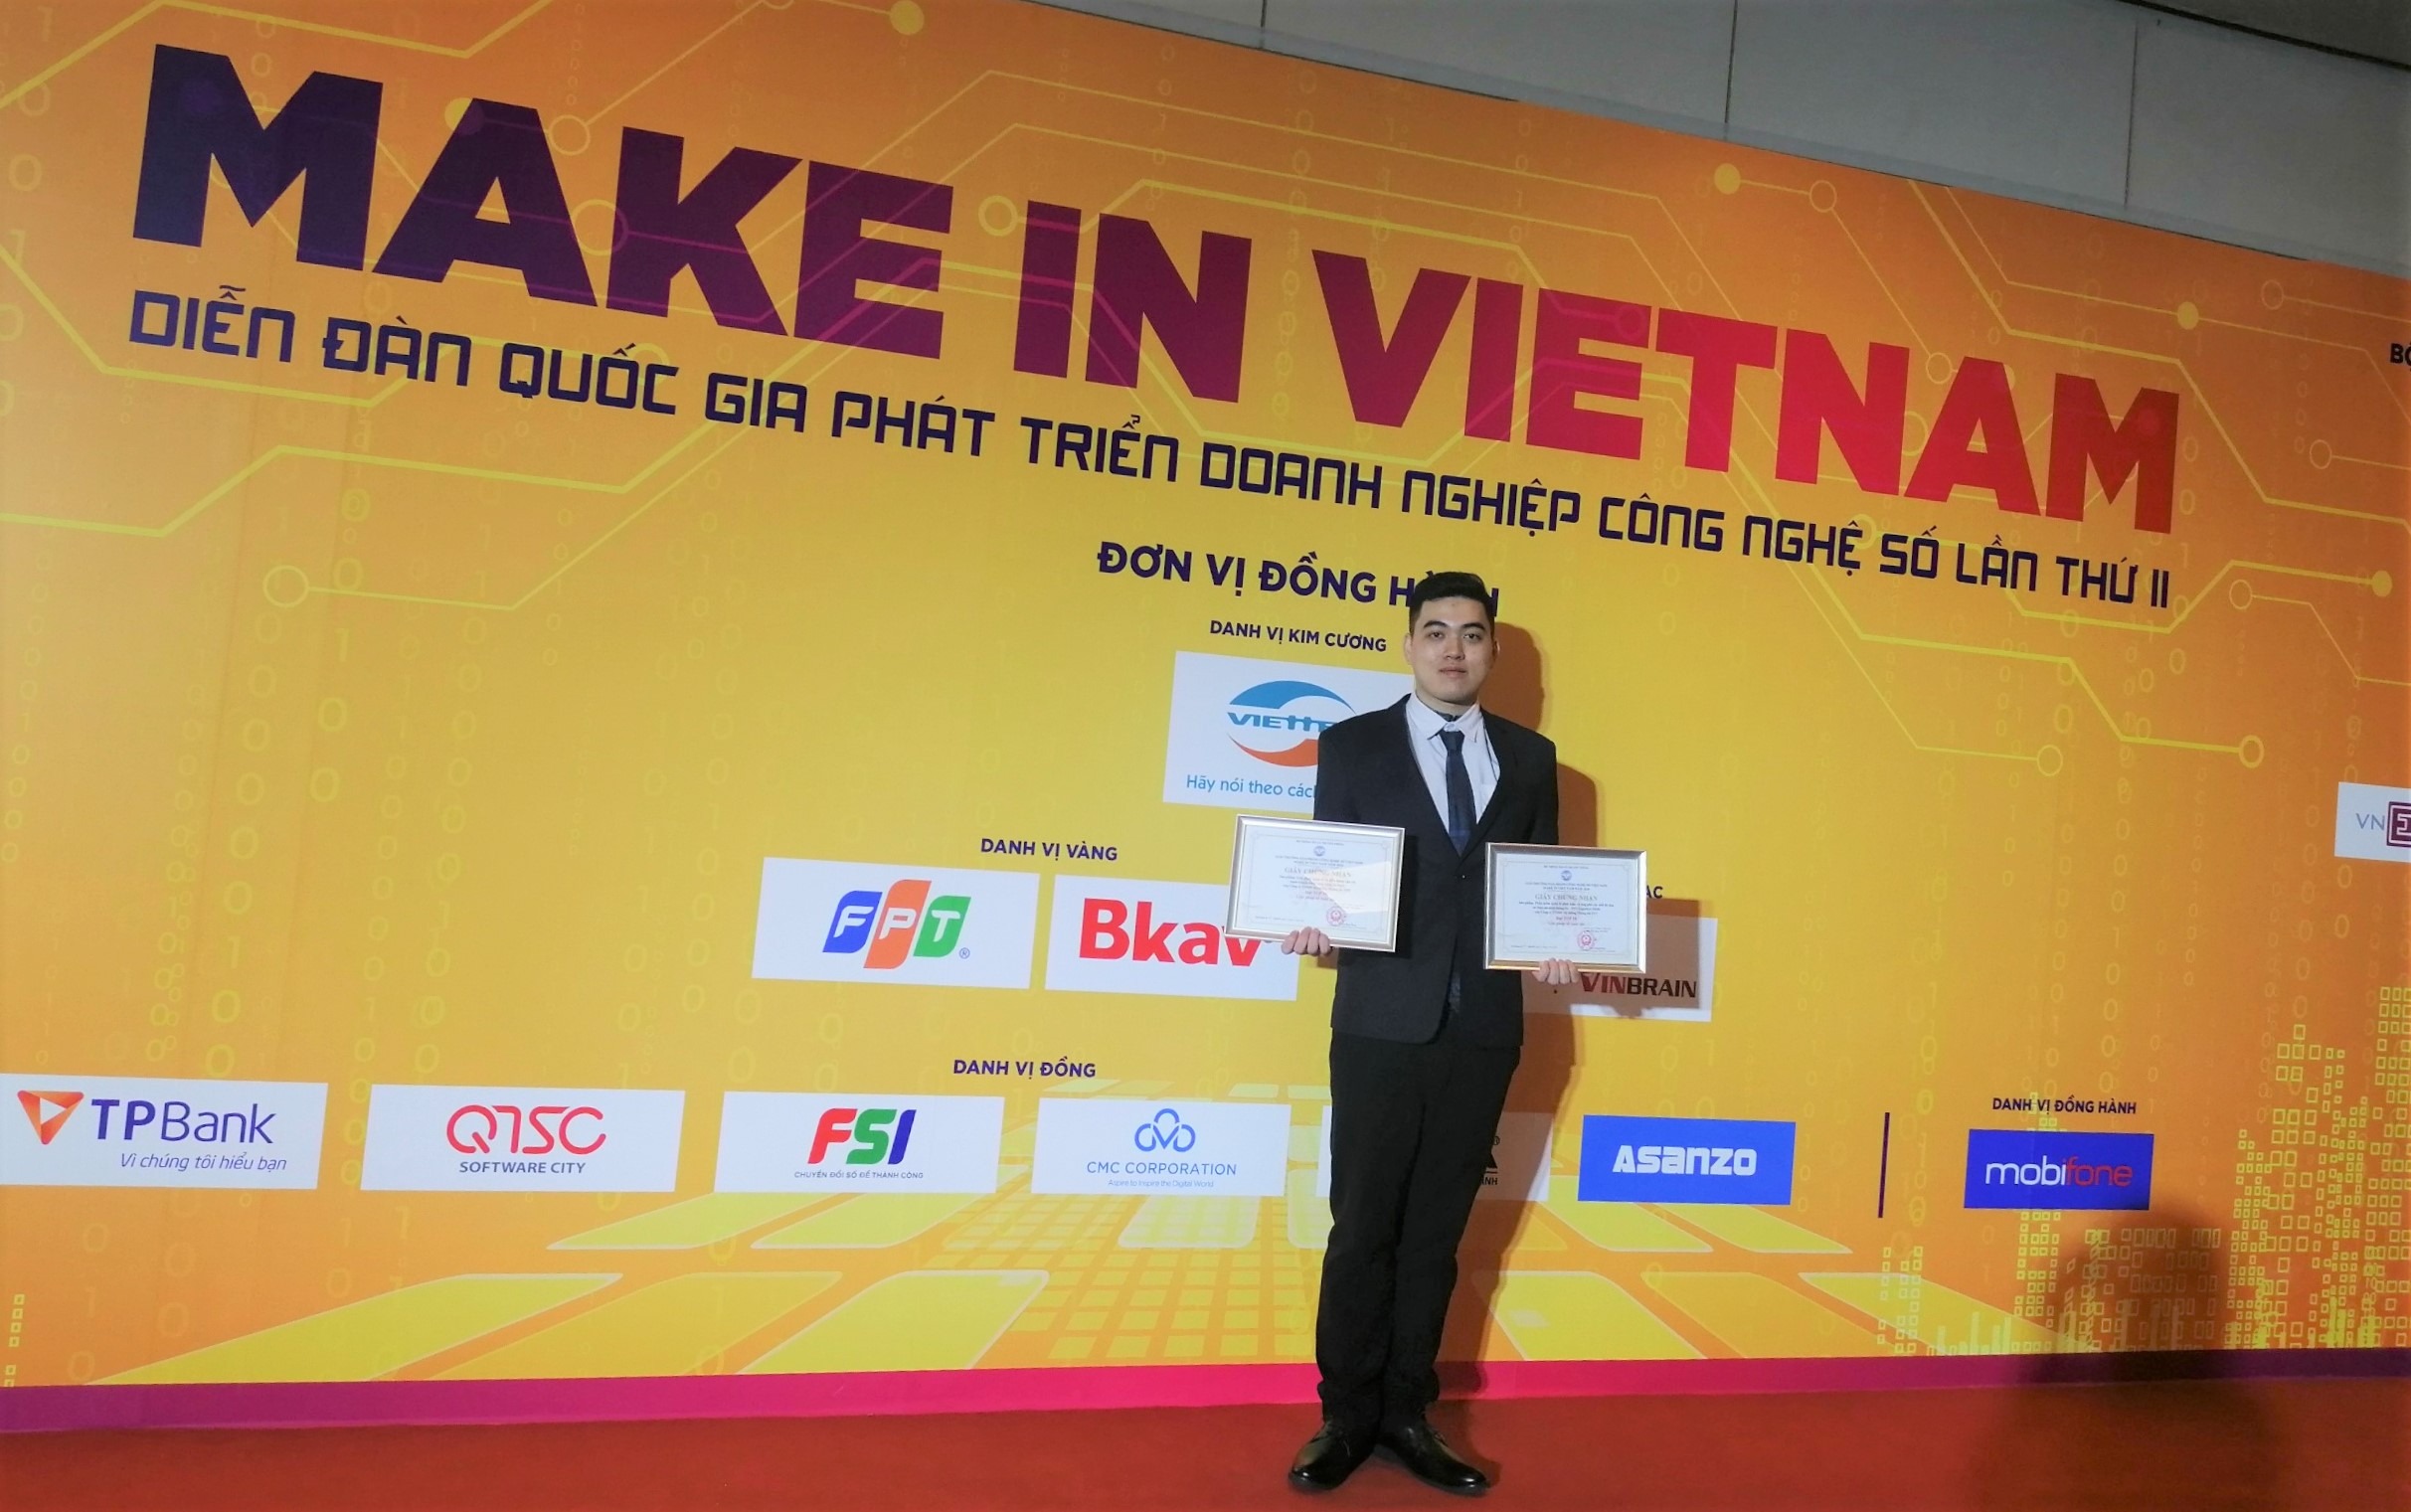 2020 Make in Viet Nam Digital Technology Product Awards – Top 10 Excellent Digital Solutions category – Managed Detection and Response Solution (FPT.EagleEye MDR)